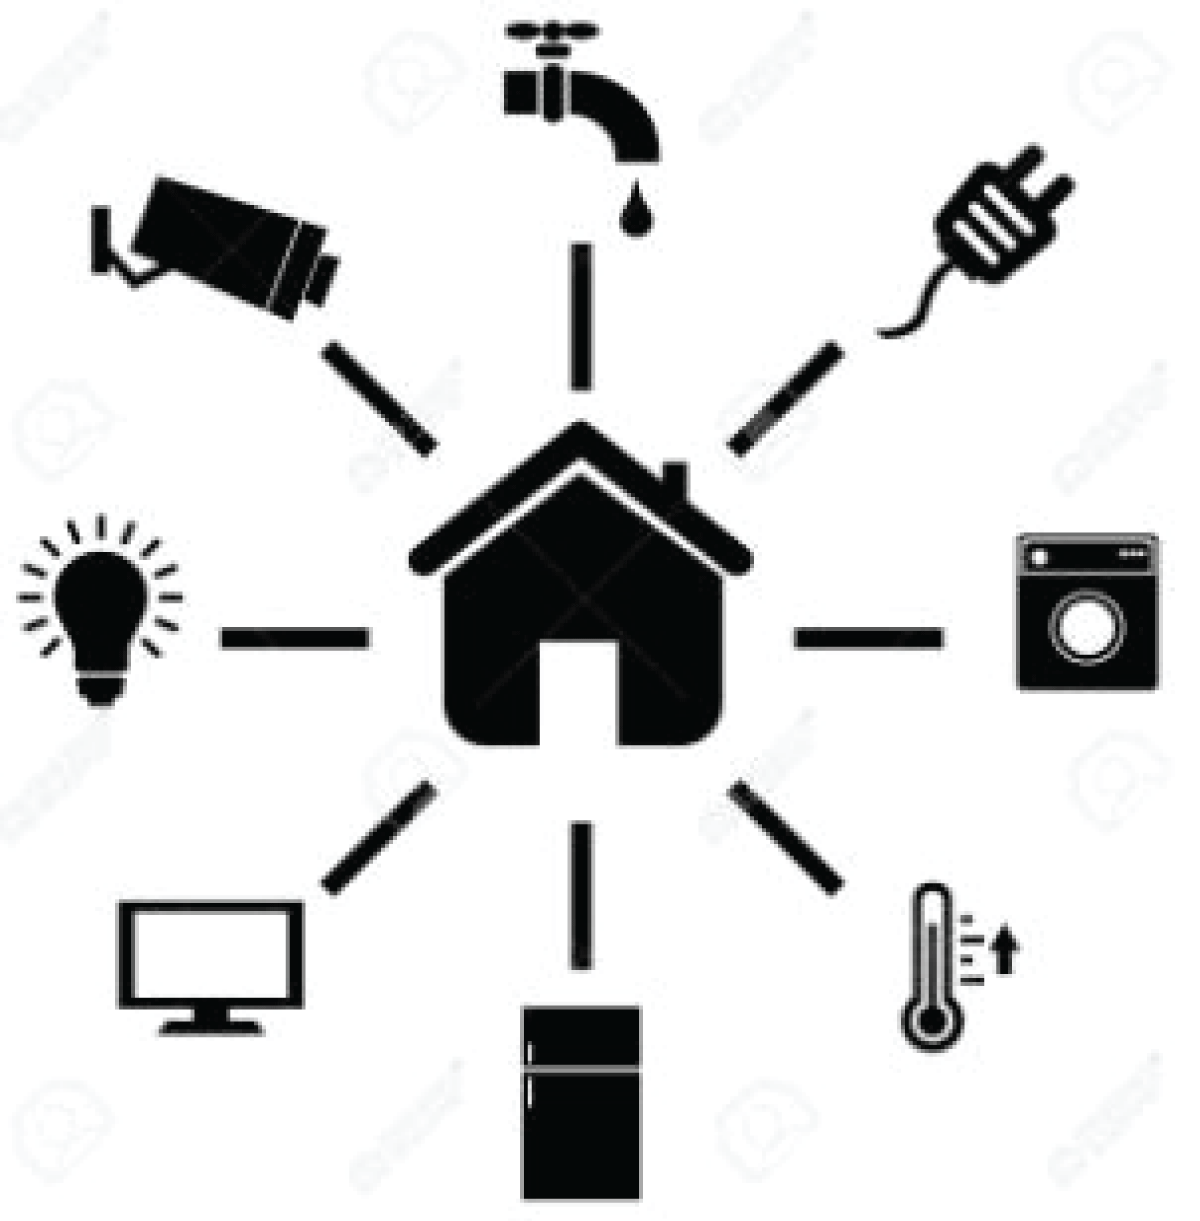 Smart home concept based on IoT.